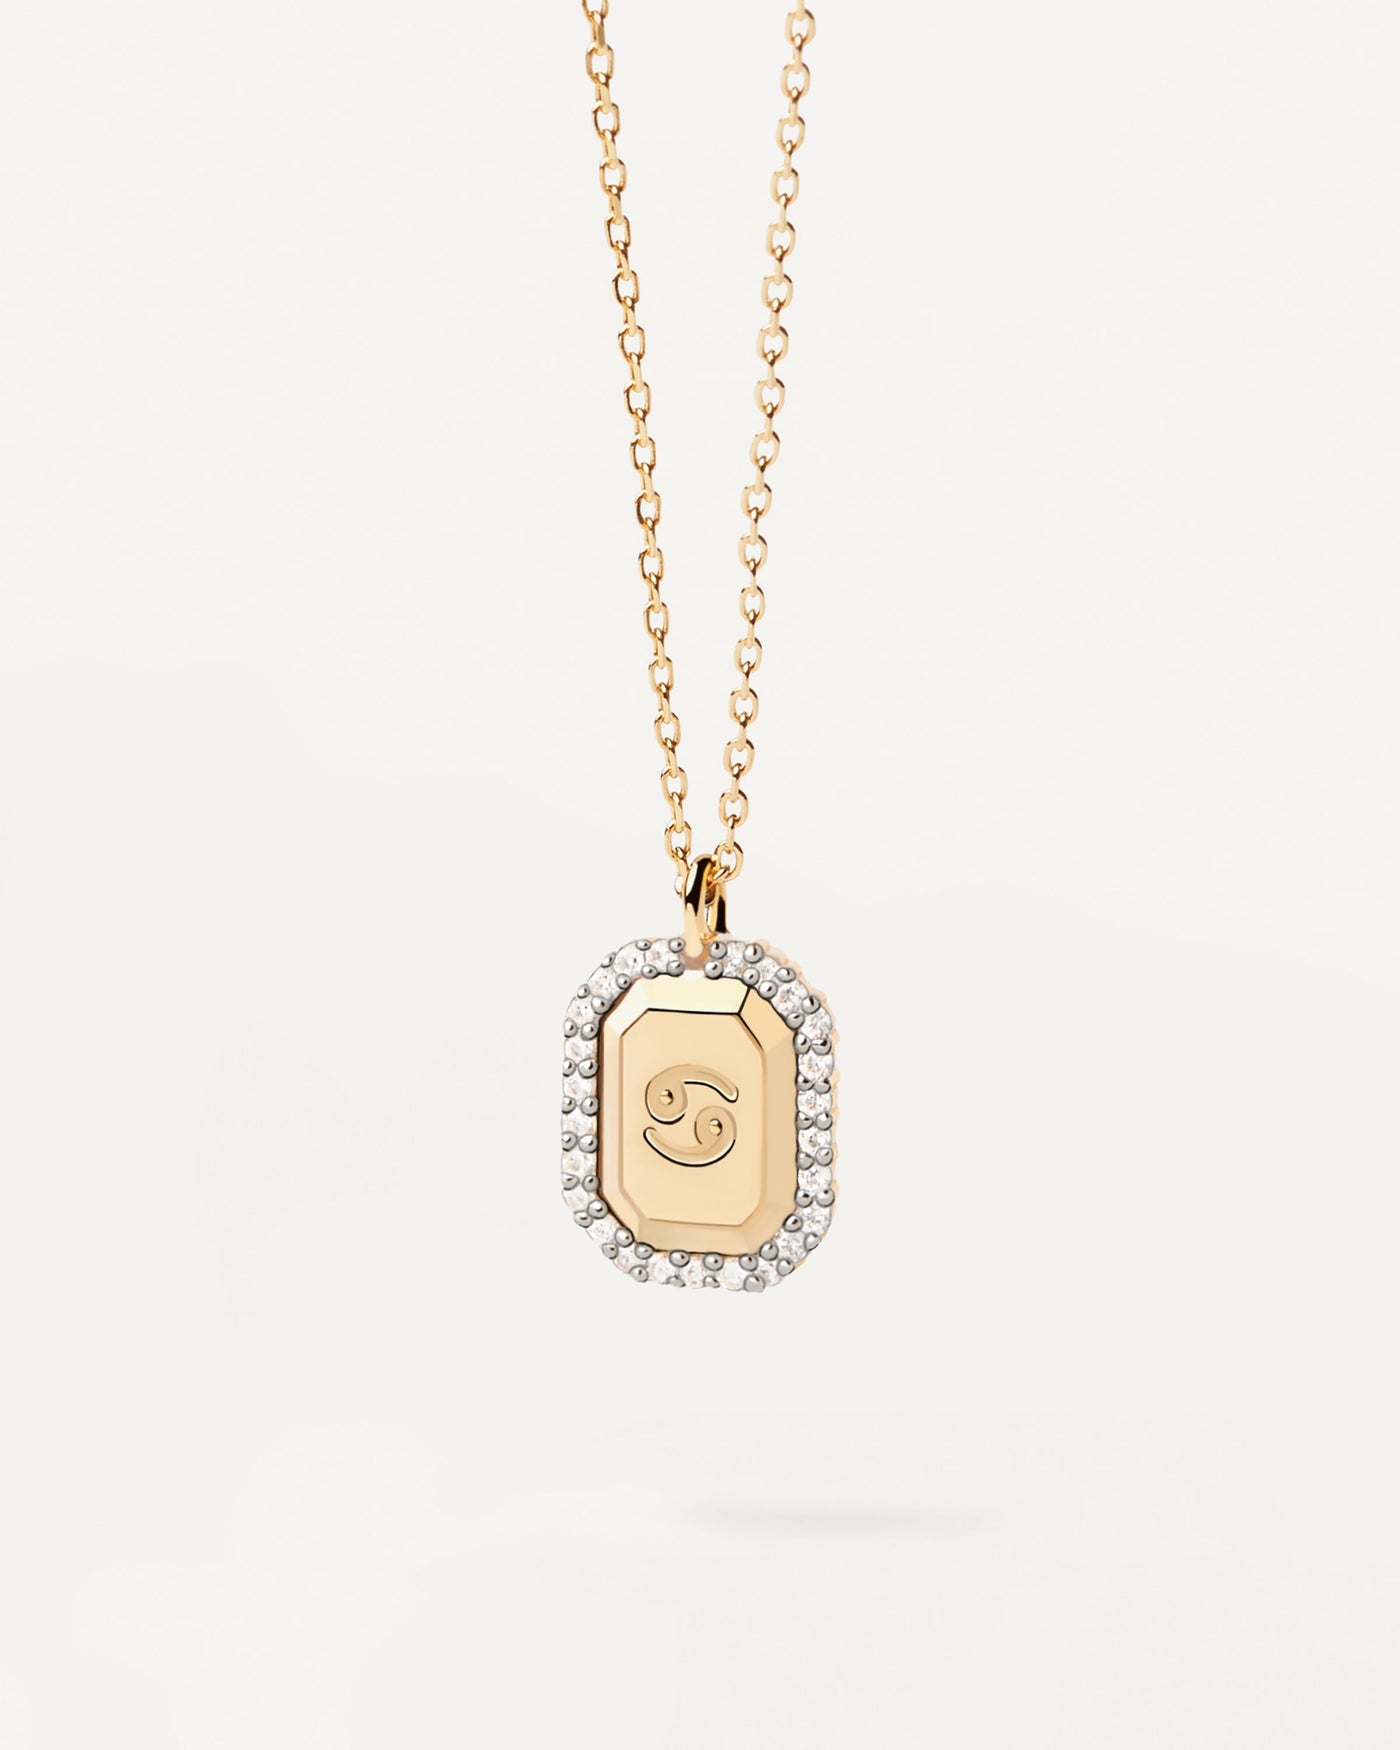 2023 Selection | Cancer zodiac necklace engraved in octagonal pendant in gold-plated silver. Get the latest arrival from PDPAOLA. Place your order safely and get this Best Seller. Free Shipping.